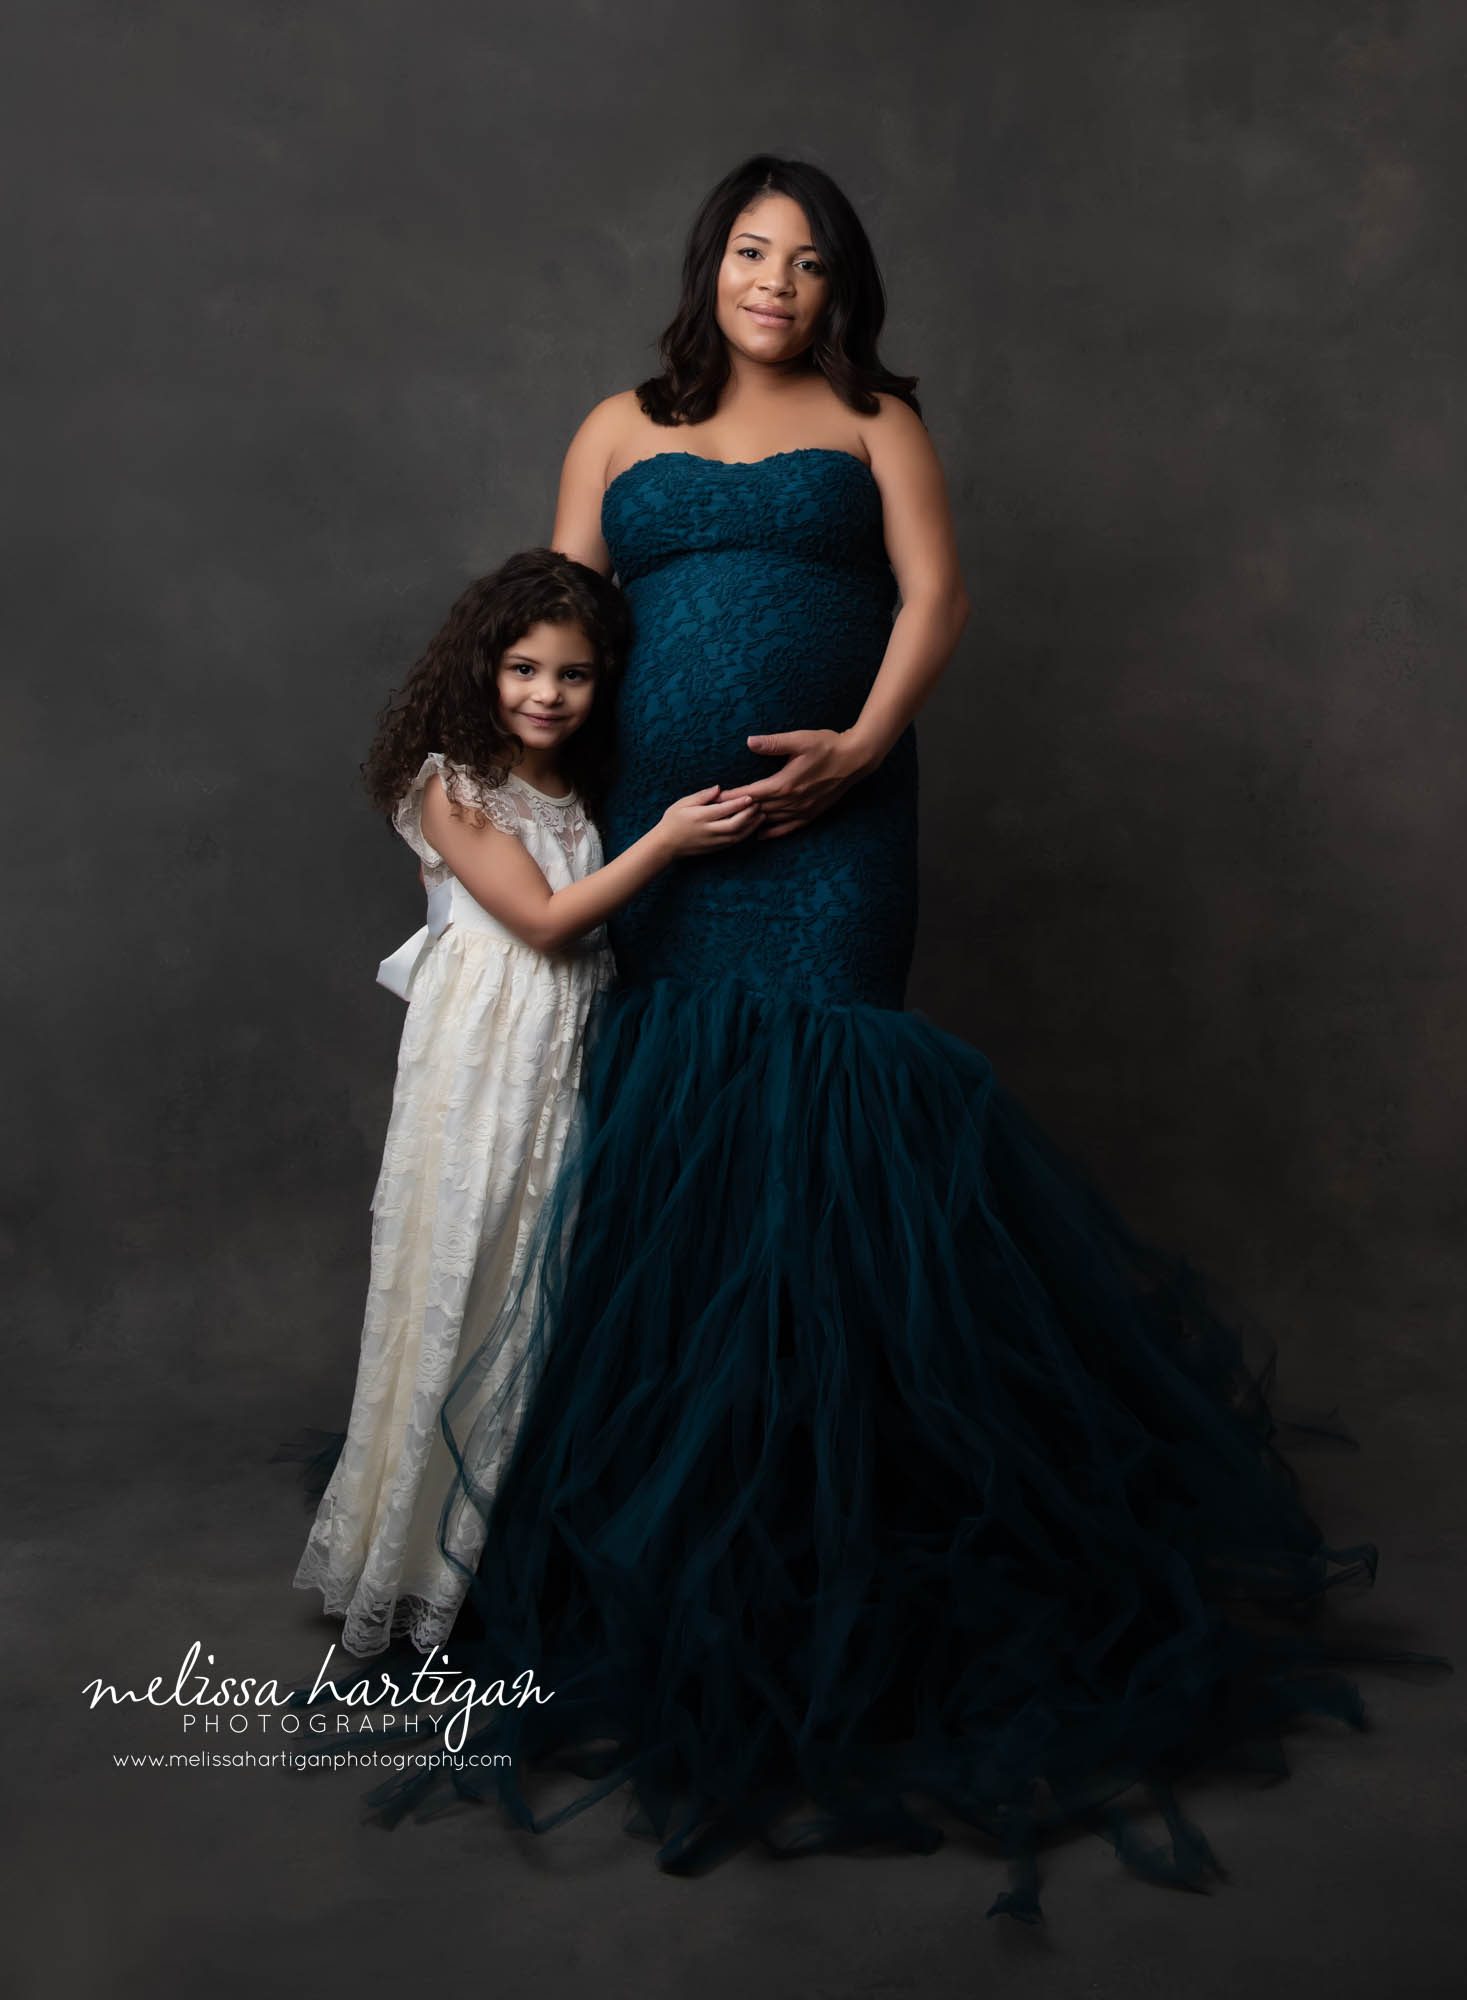 Studio maternity session expectant and daughter standing maternity pose